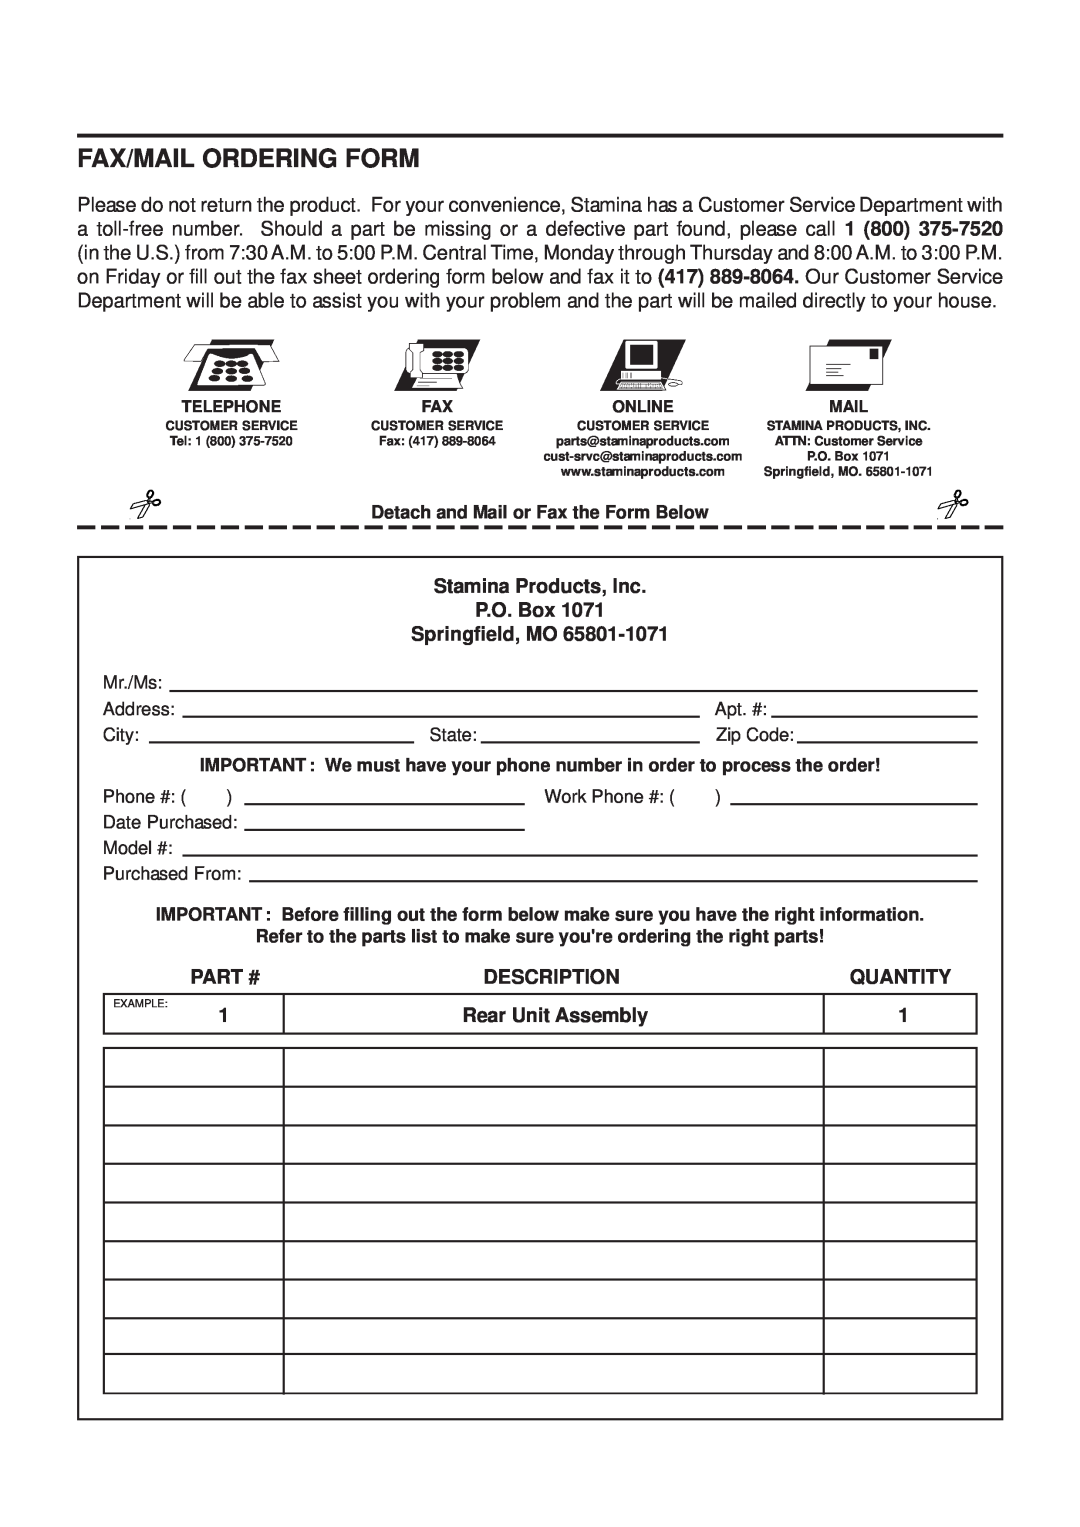 Stamina Products 40-0046A owner manual Fax/Mail Ordering Form, Stamina Products, Inc P.O. Box Springfield, MO, Description 